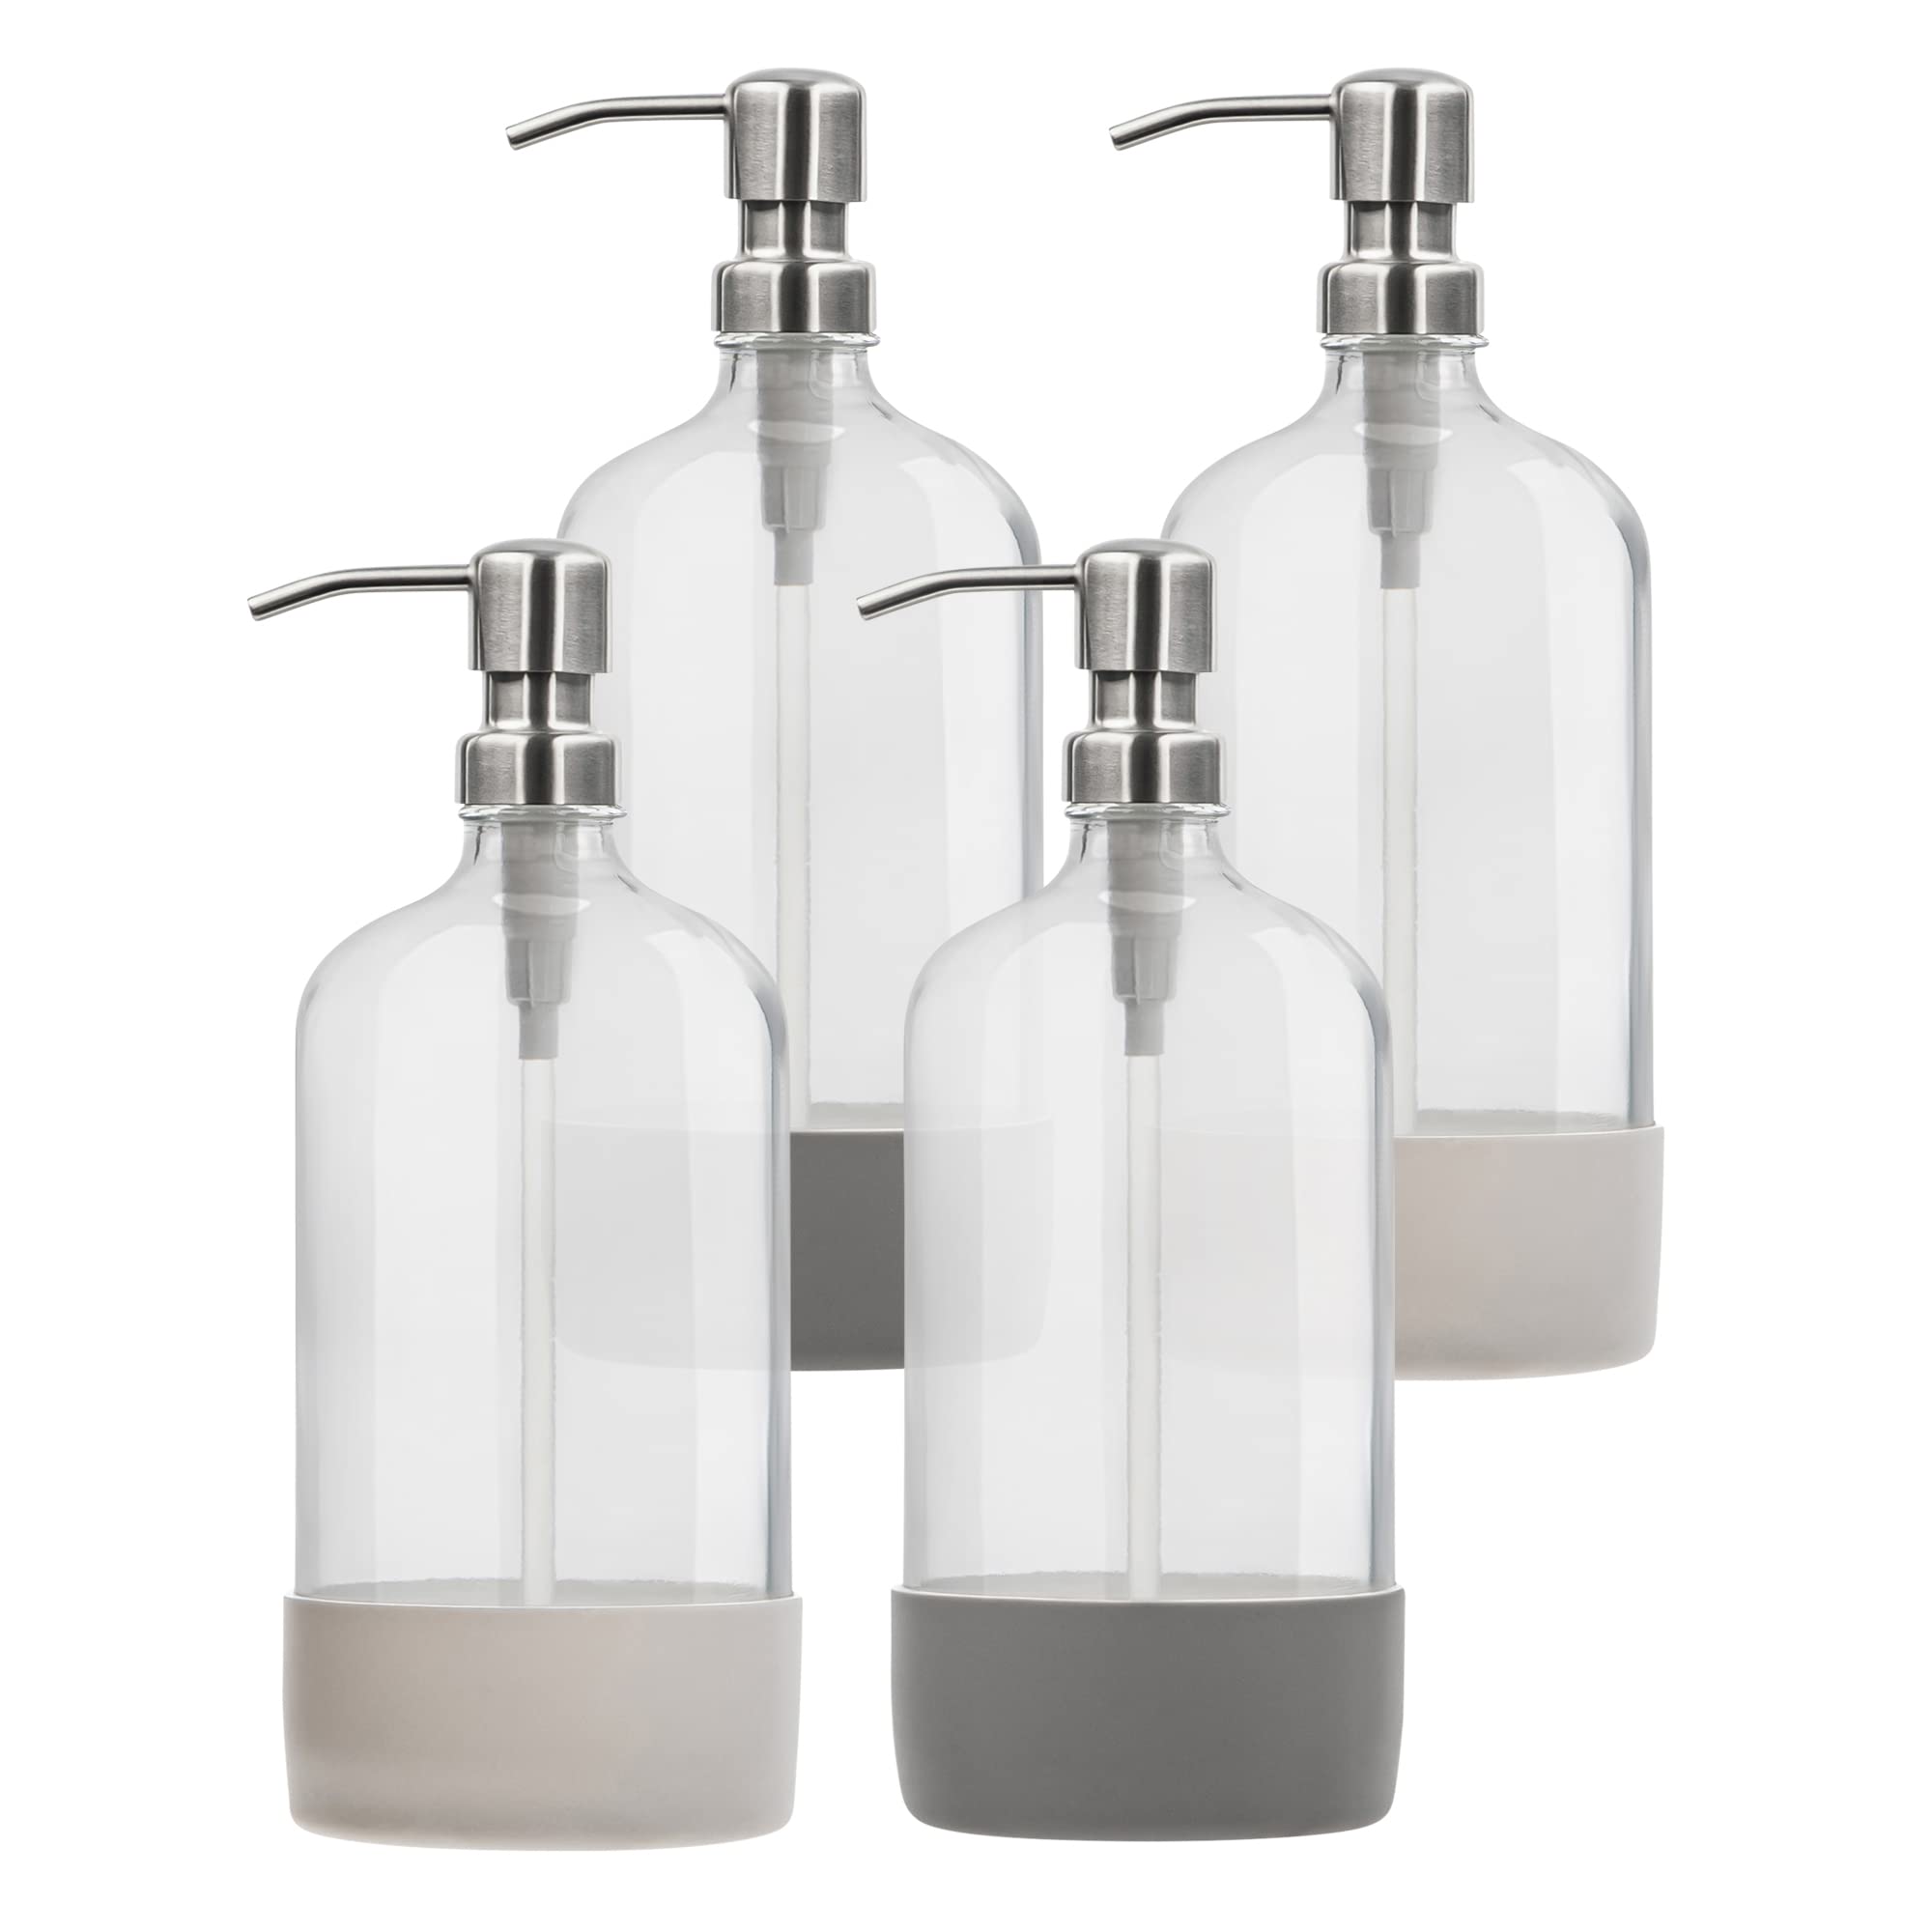 32 oz Glass Pump Bottle Rustproof Stainless Steel Pump, Funnel, and Lids. Modern Farmhouse Vintage Jar, Large Glass Shampoo Bottles with Pump and Laundry Soap Dispenser - Silver  - Like New